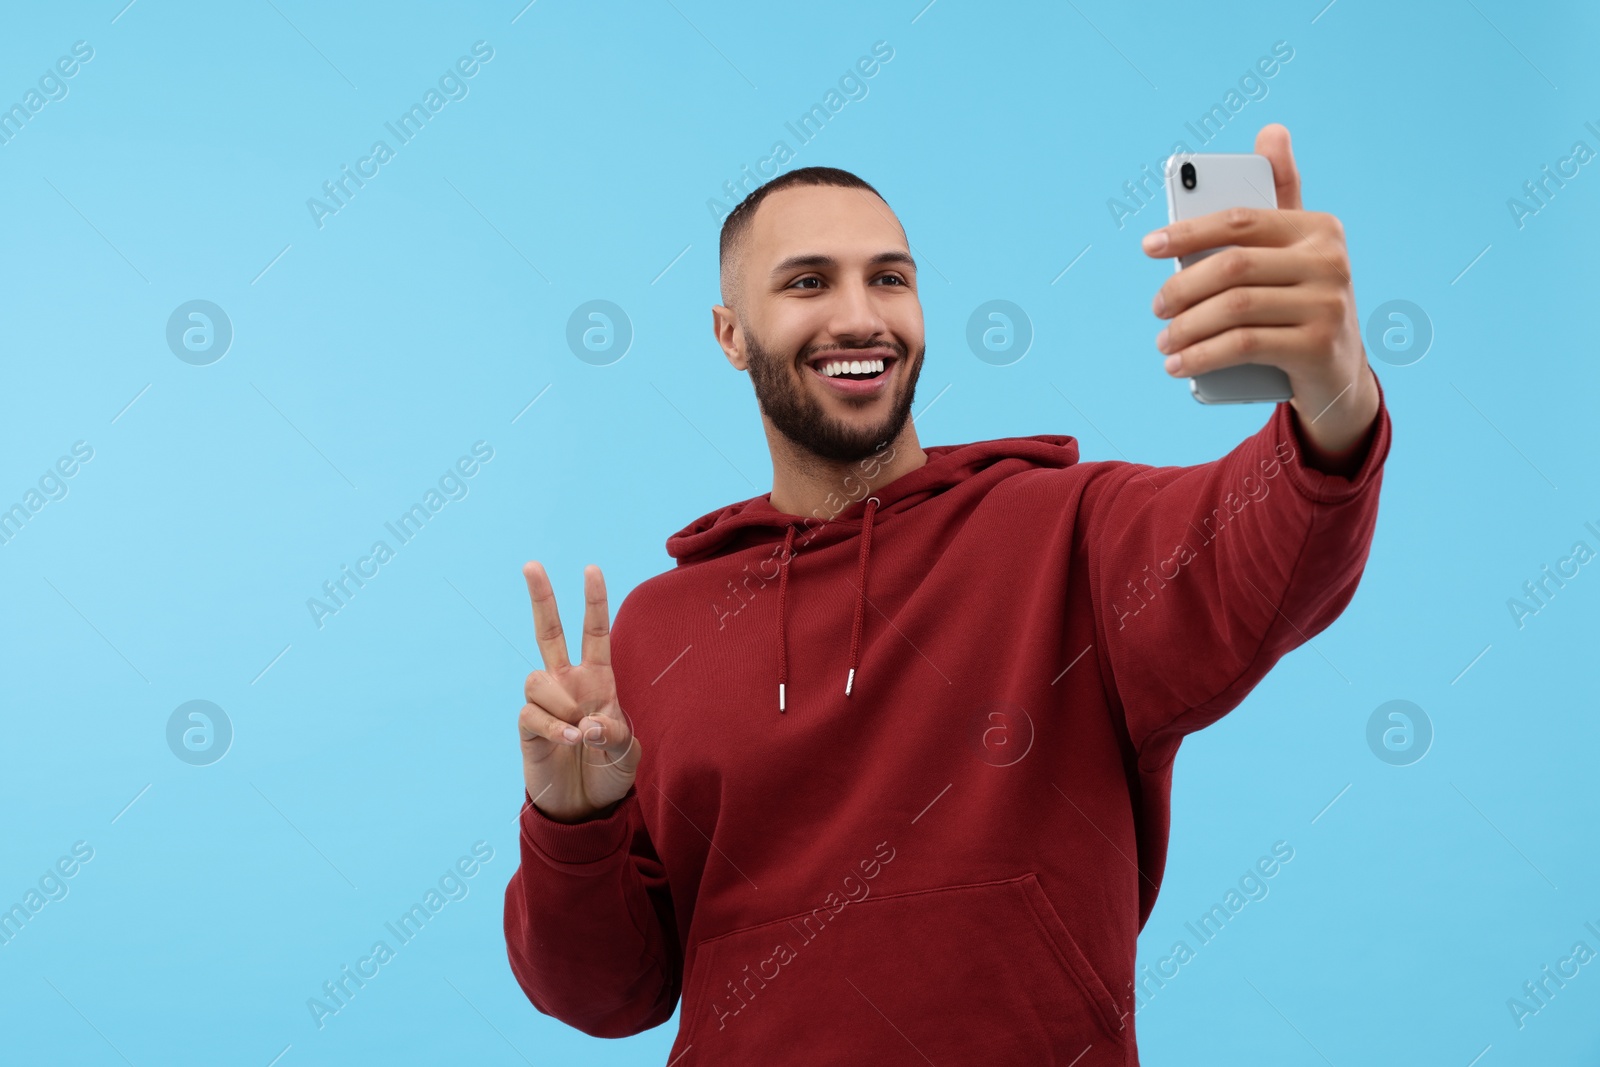 Photo of Smiling young man taking selfie with smartphone and showing peace sign on light blue background